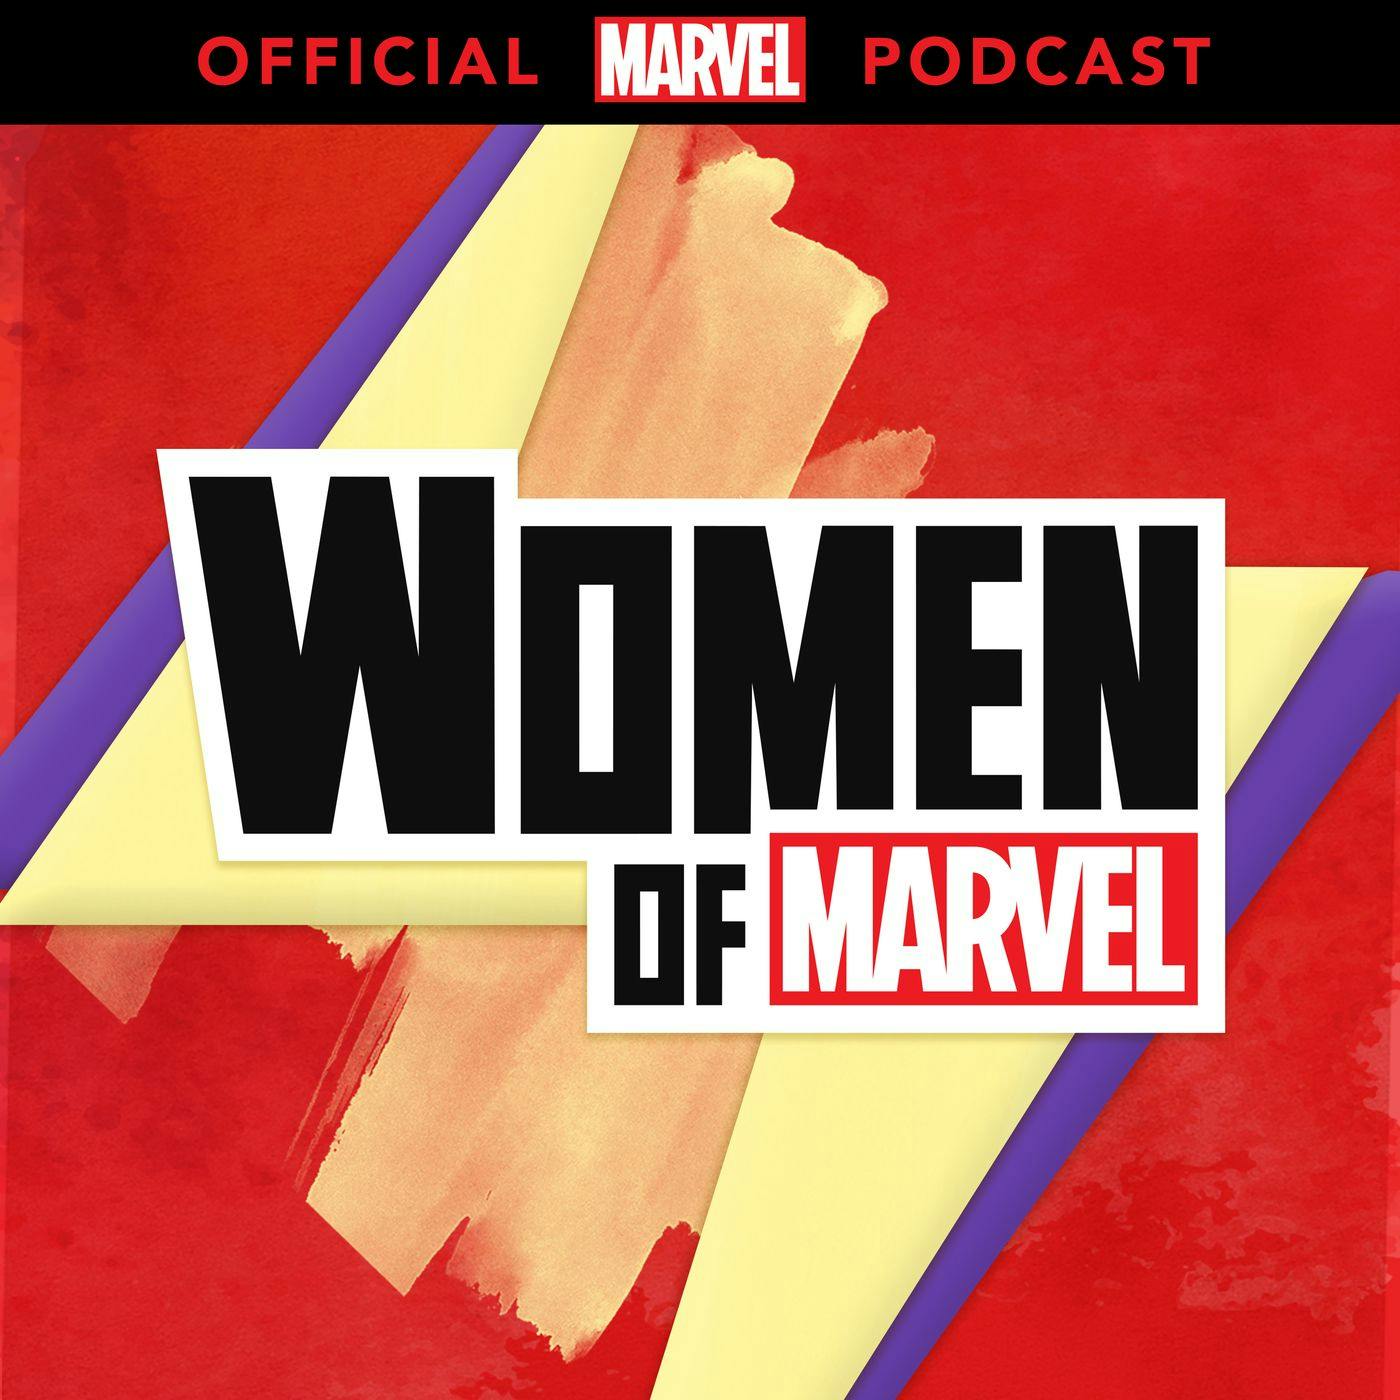 Ep 107 - Voices of Marvel with Chris & Ruth Gage